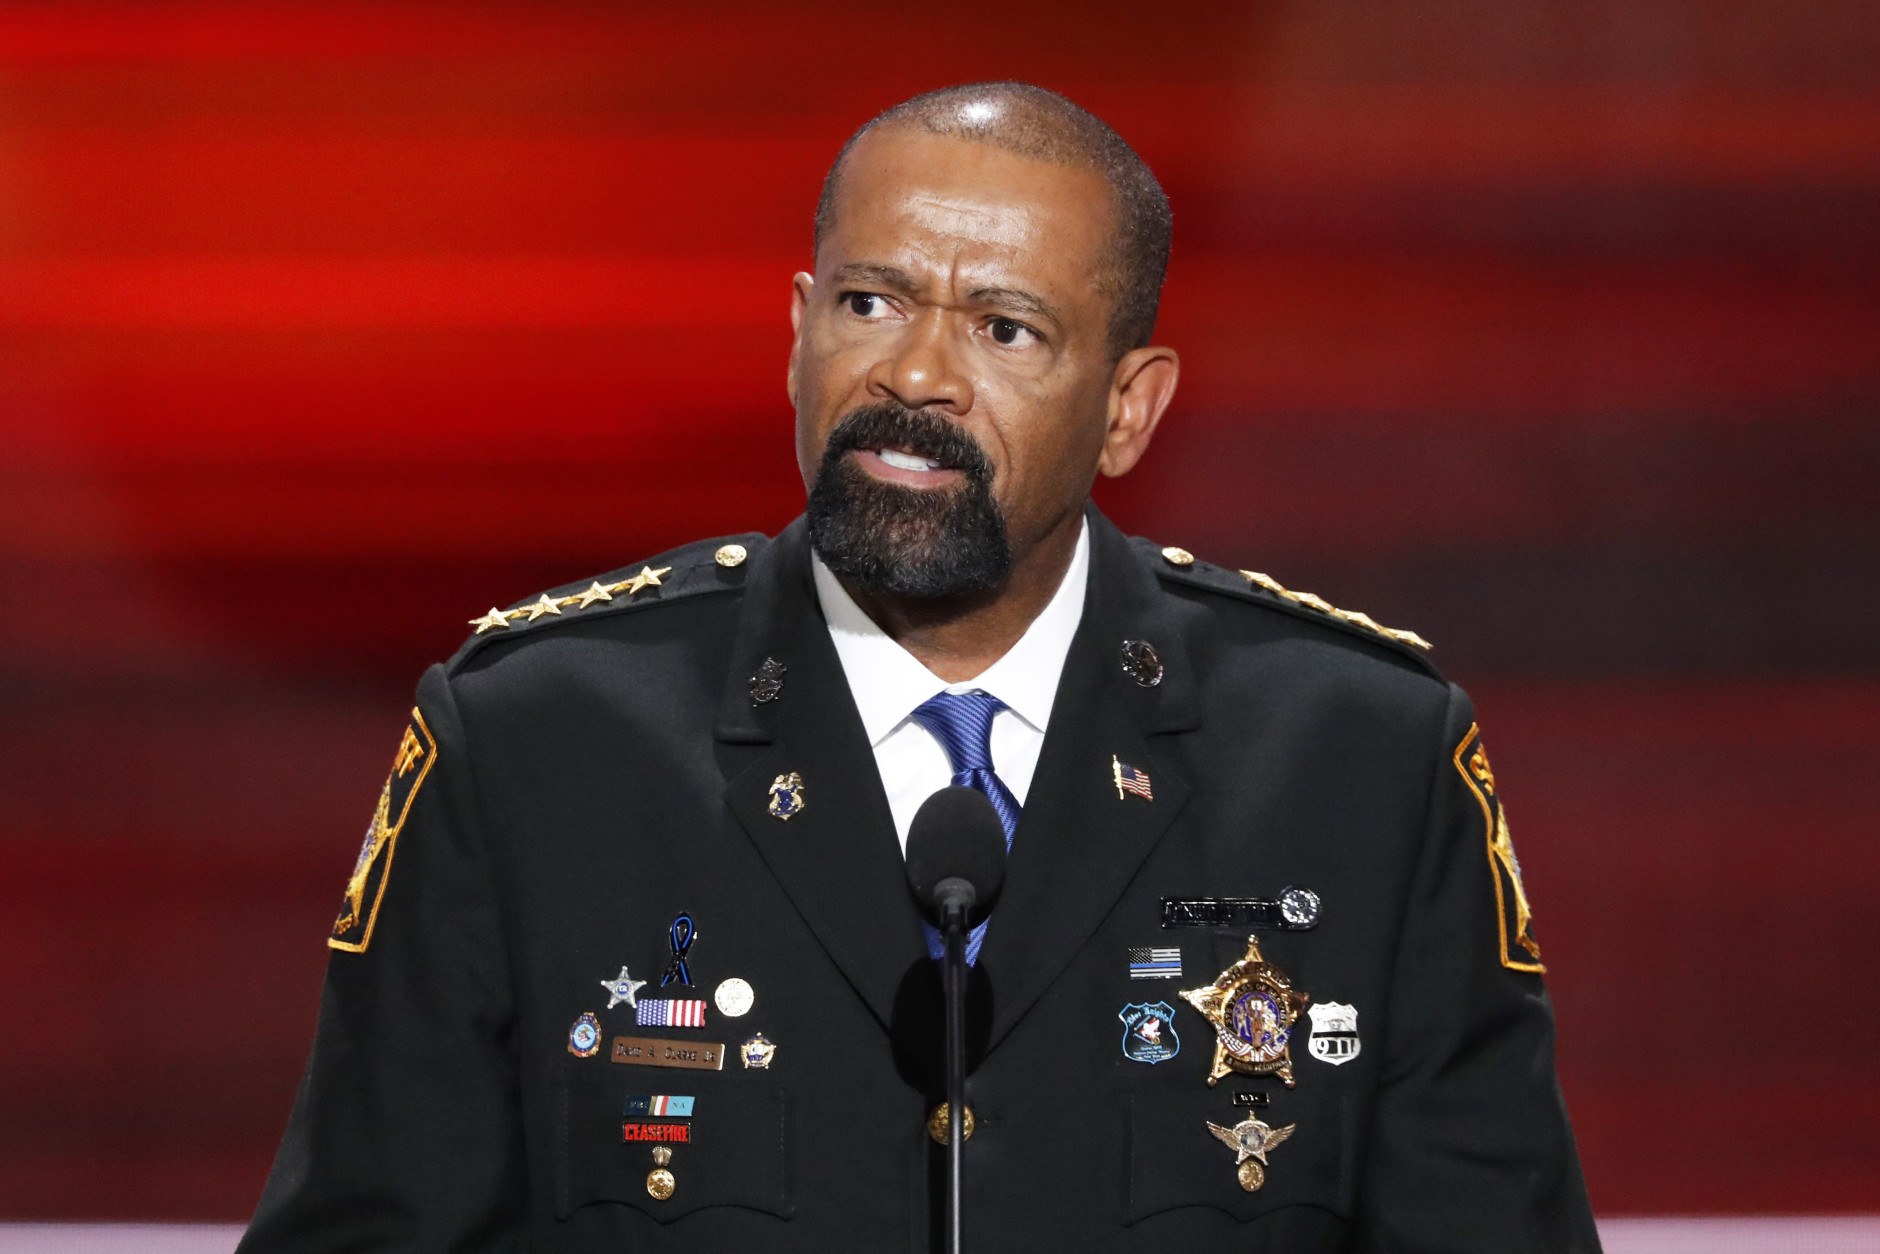 David Clarke, Sheriff of Milwaukee County, Wis., speaks during the opening day of the Republican National Convention in Cleveland, Monday, July 18, 2016. (AP Photo/J. Scott Applewhite)